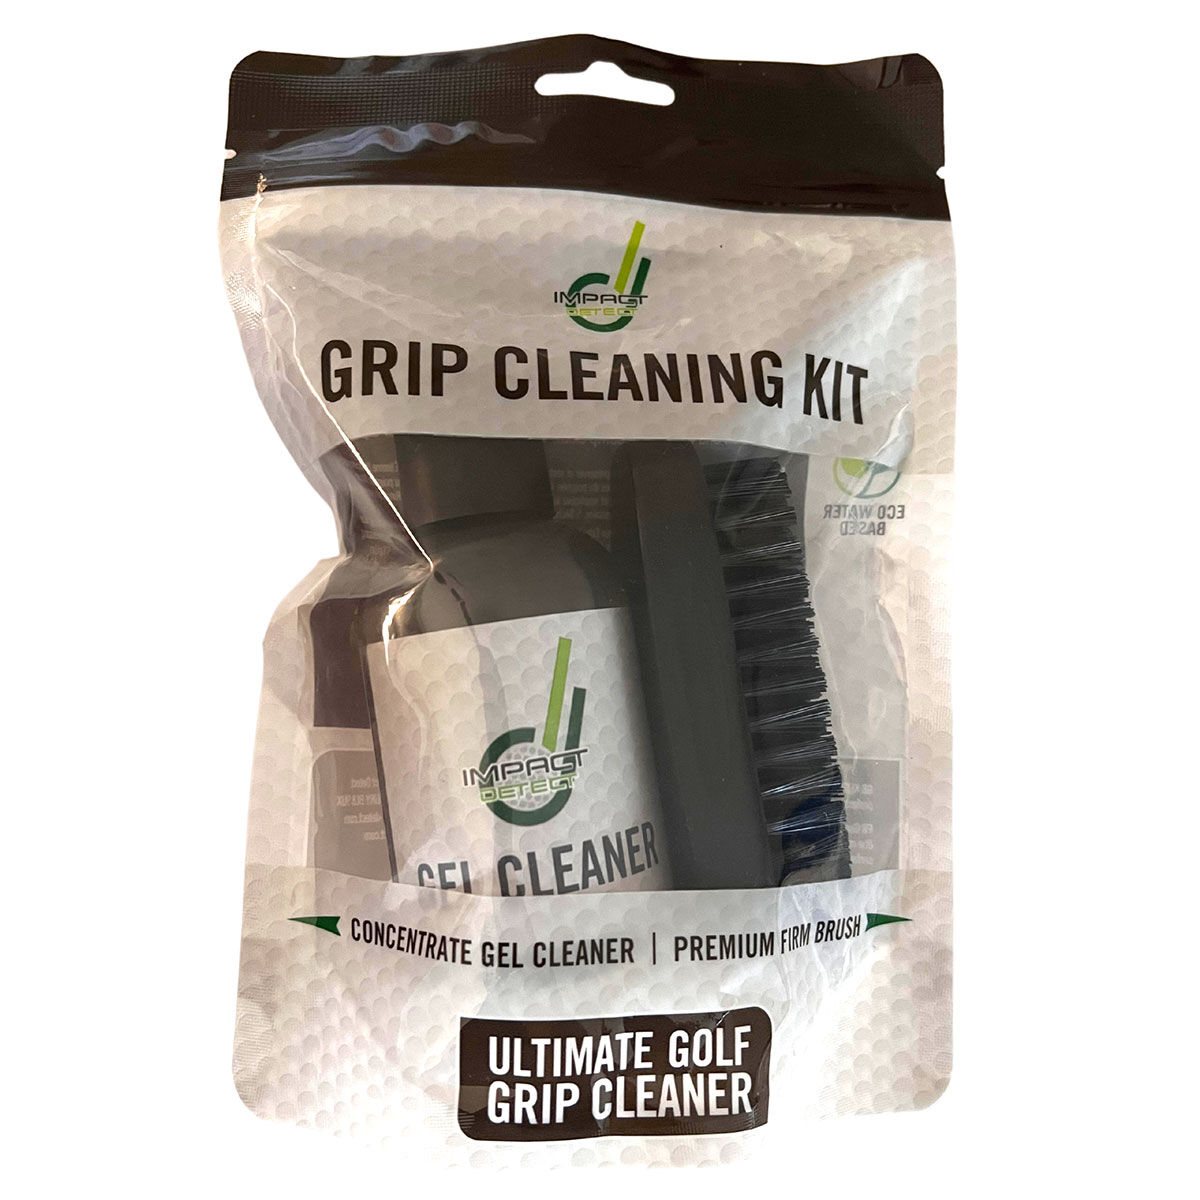 Impact Detect Golf Grip Cleaner Kit | American Golf, One Size